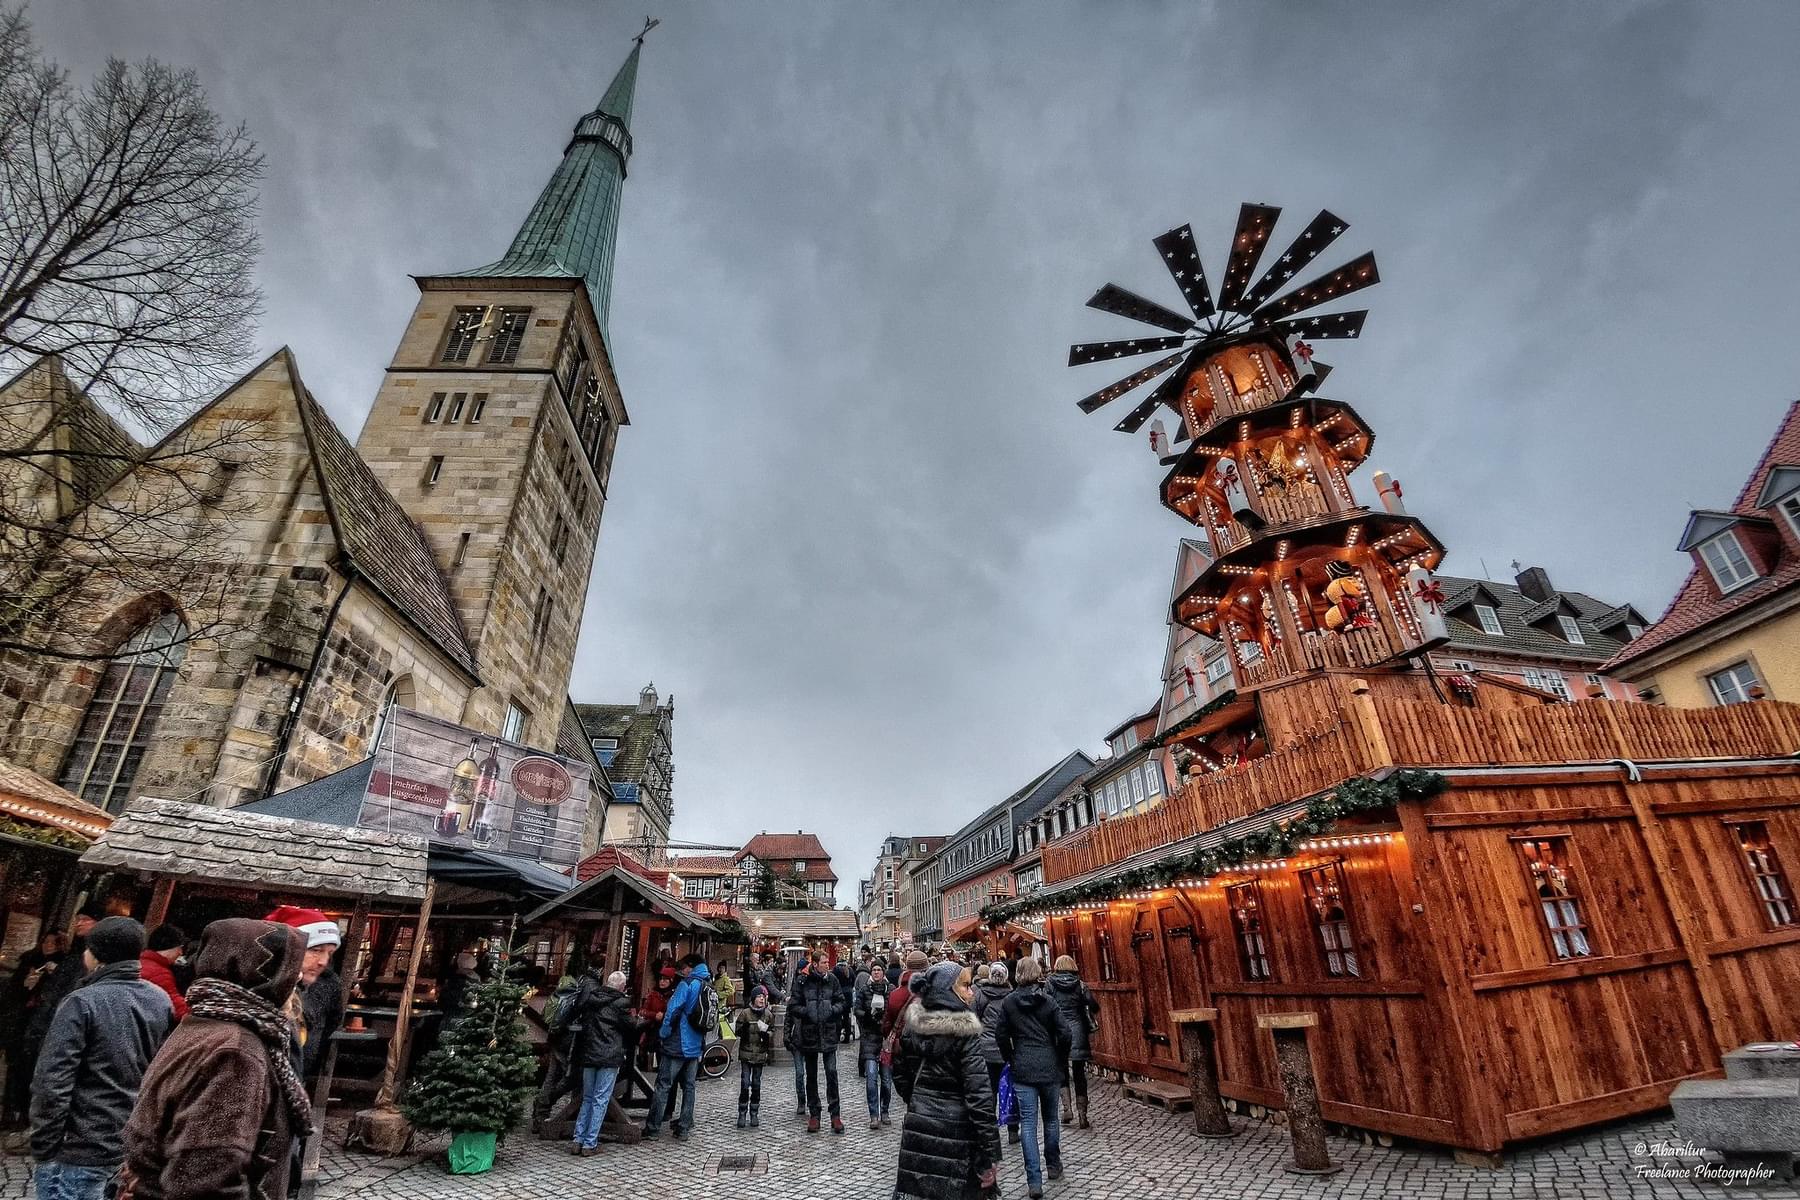 Stroll The Christmas Markets